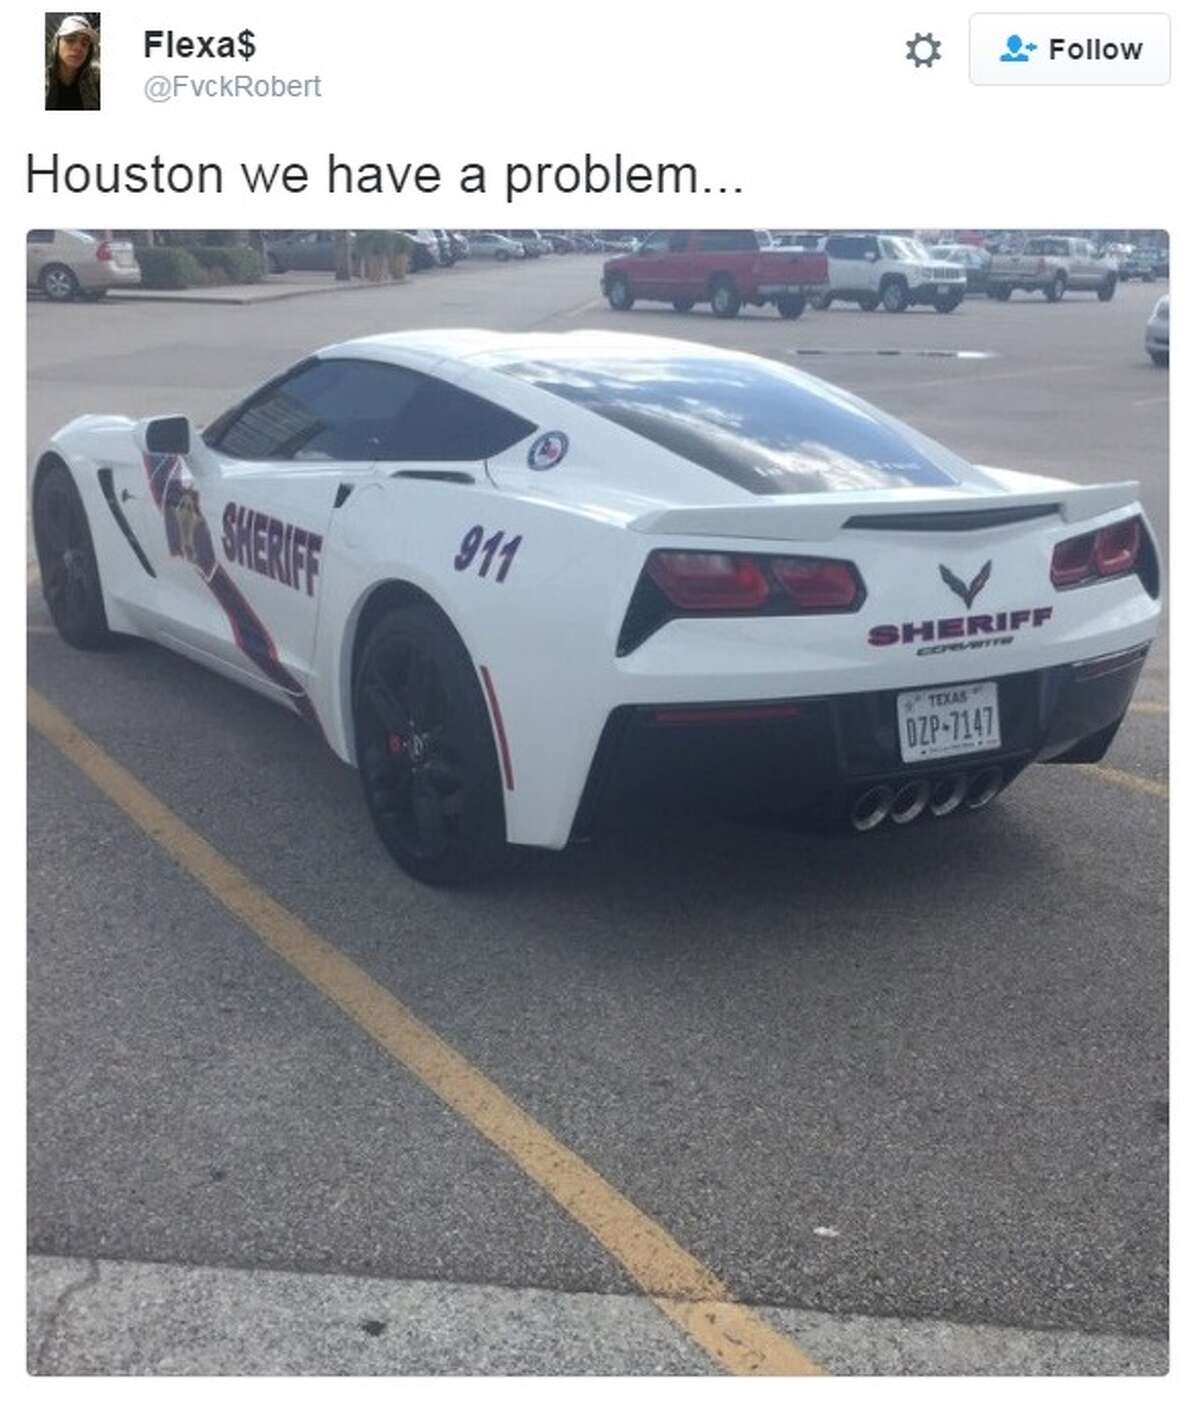 A Corvette with a Montgomery County Sheriff's Office decal on it has been spotted in late July, 2016. Lt. Brady Fitzgerald with the Sheriff's Office said the car belongs to a dealership in Montgomery County and is being used in an expo show in Dallas on July 23 and 24, 2016. It isn't owned by the Sheriff's Office. Twitter via @FvckRobert